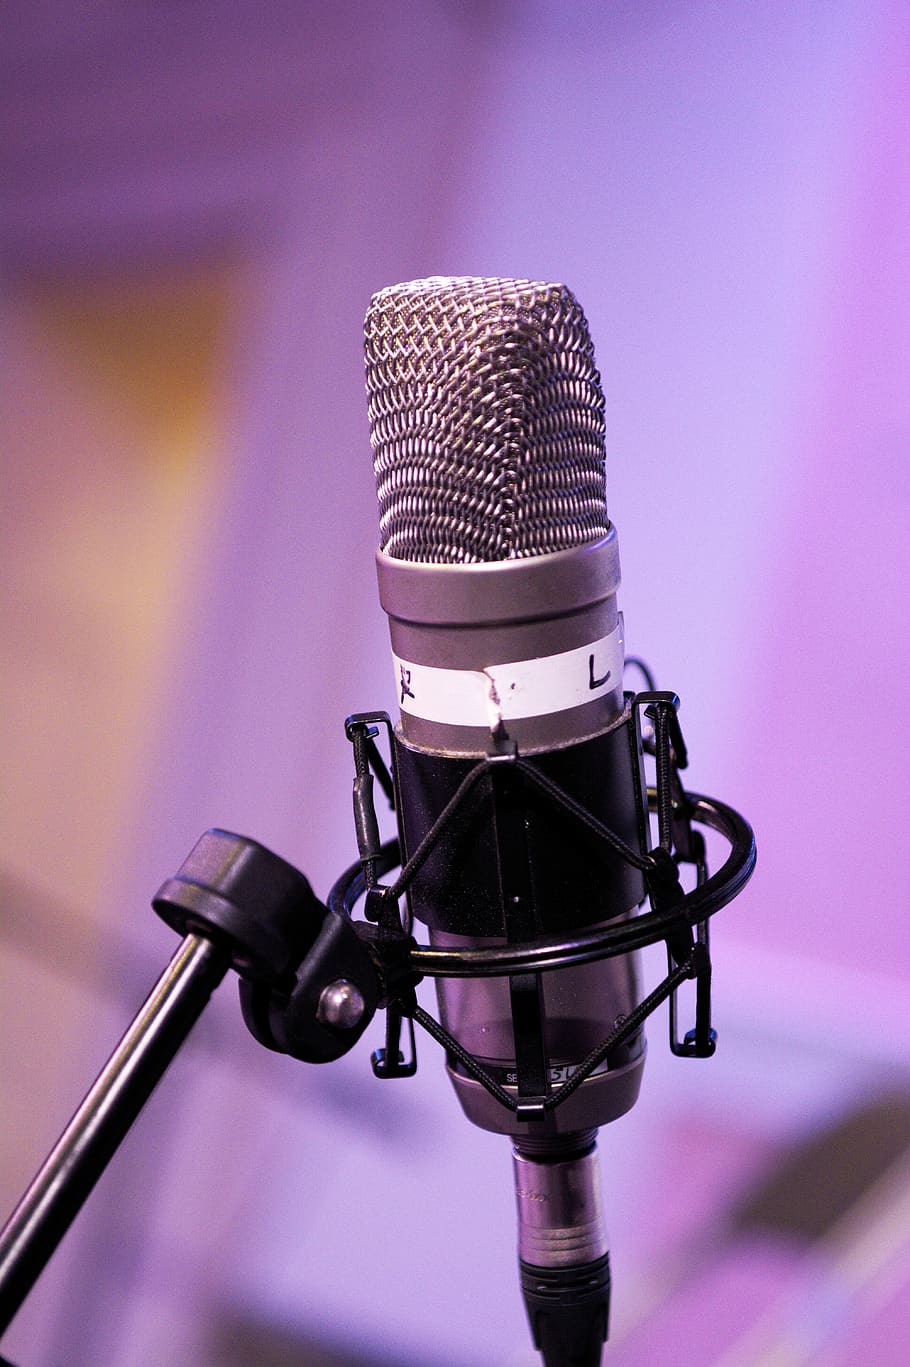 mic, podcast, microphone, broadcasting, communication, podcasting, mike, equipment, studio, media